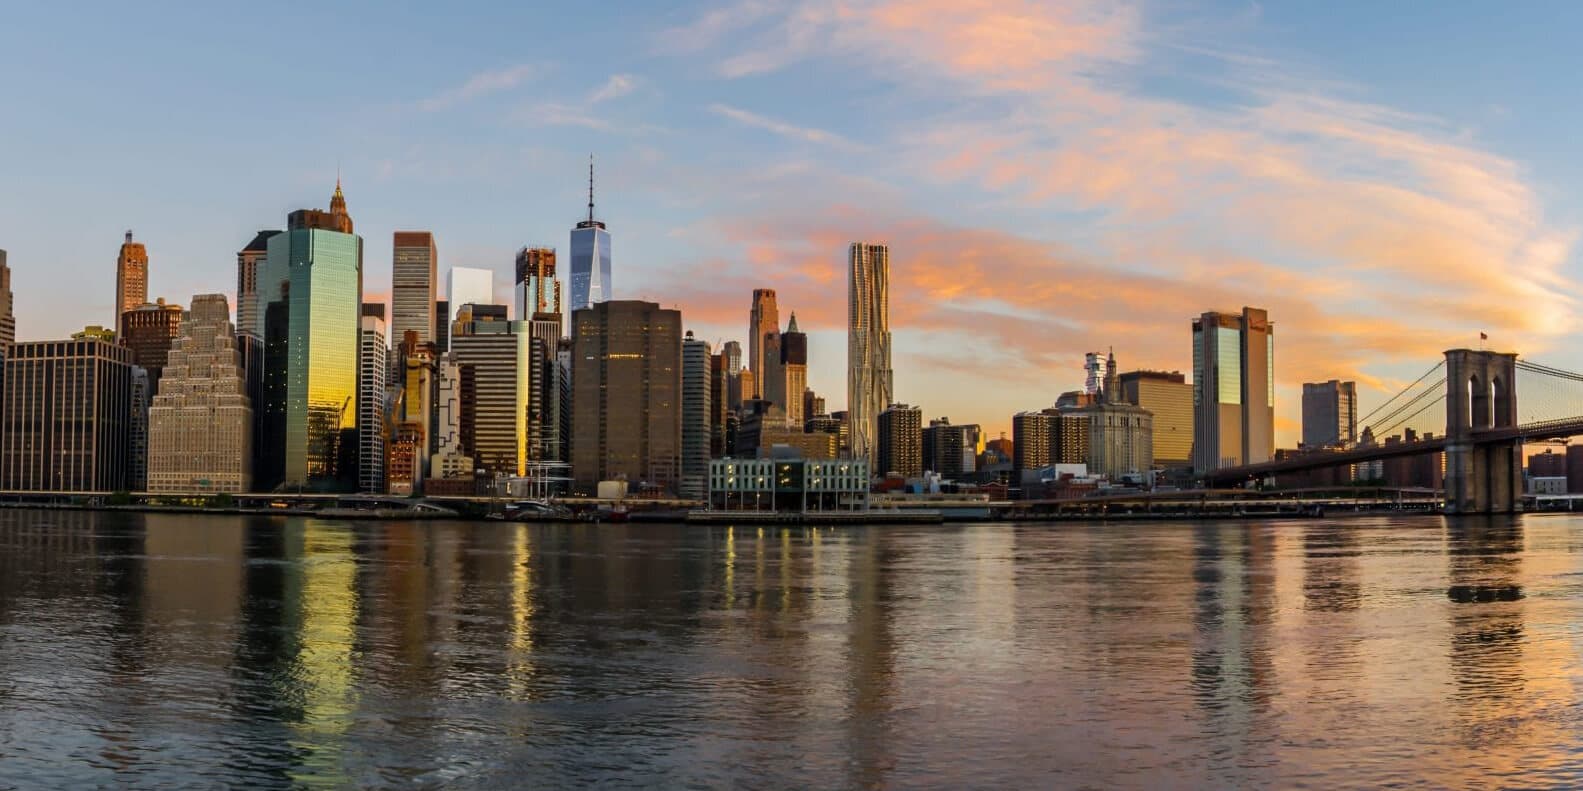 A wide shot of the Manhattan skyline with water in the foreground.